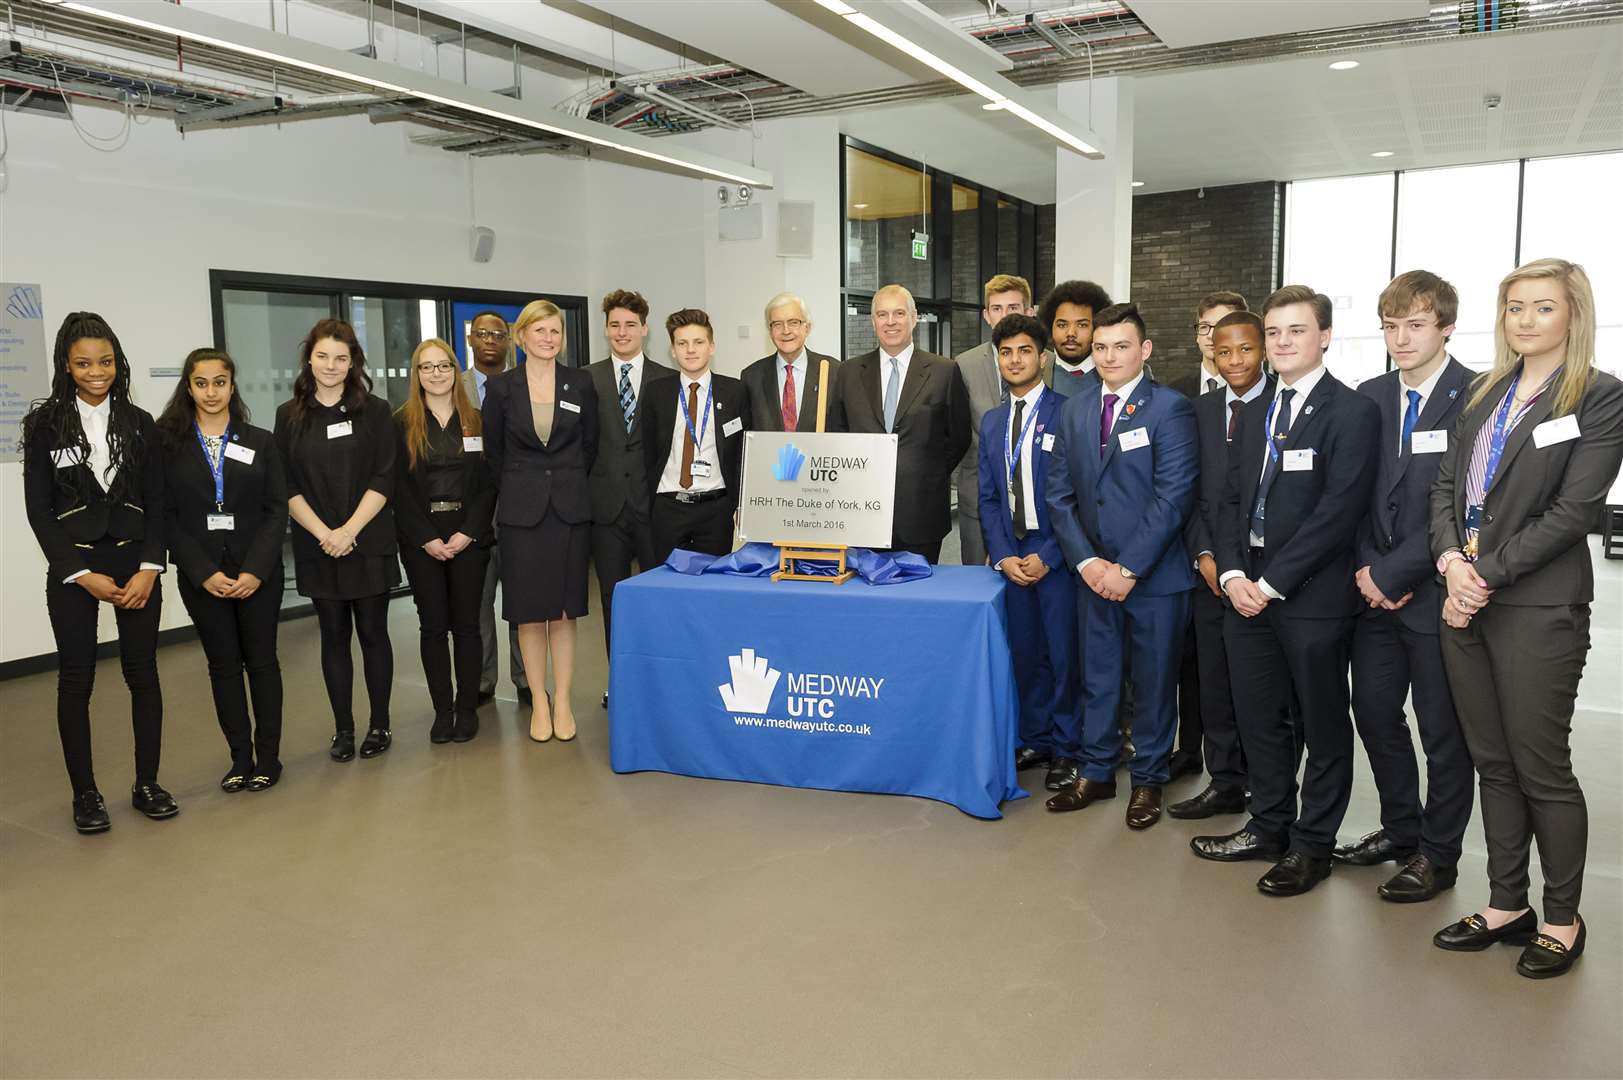 Staff and students with HRH the Duke of York and the commemorative plaque for the opening